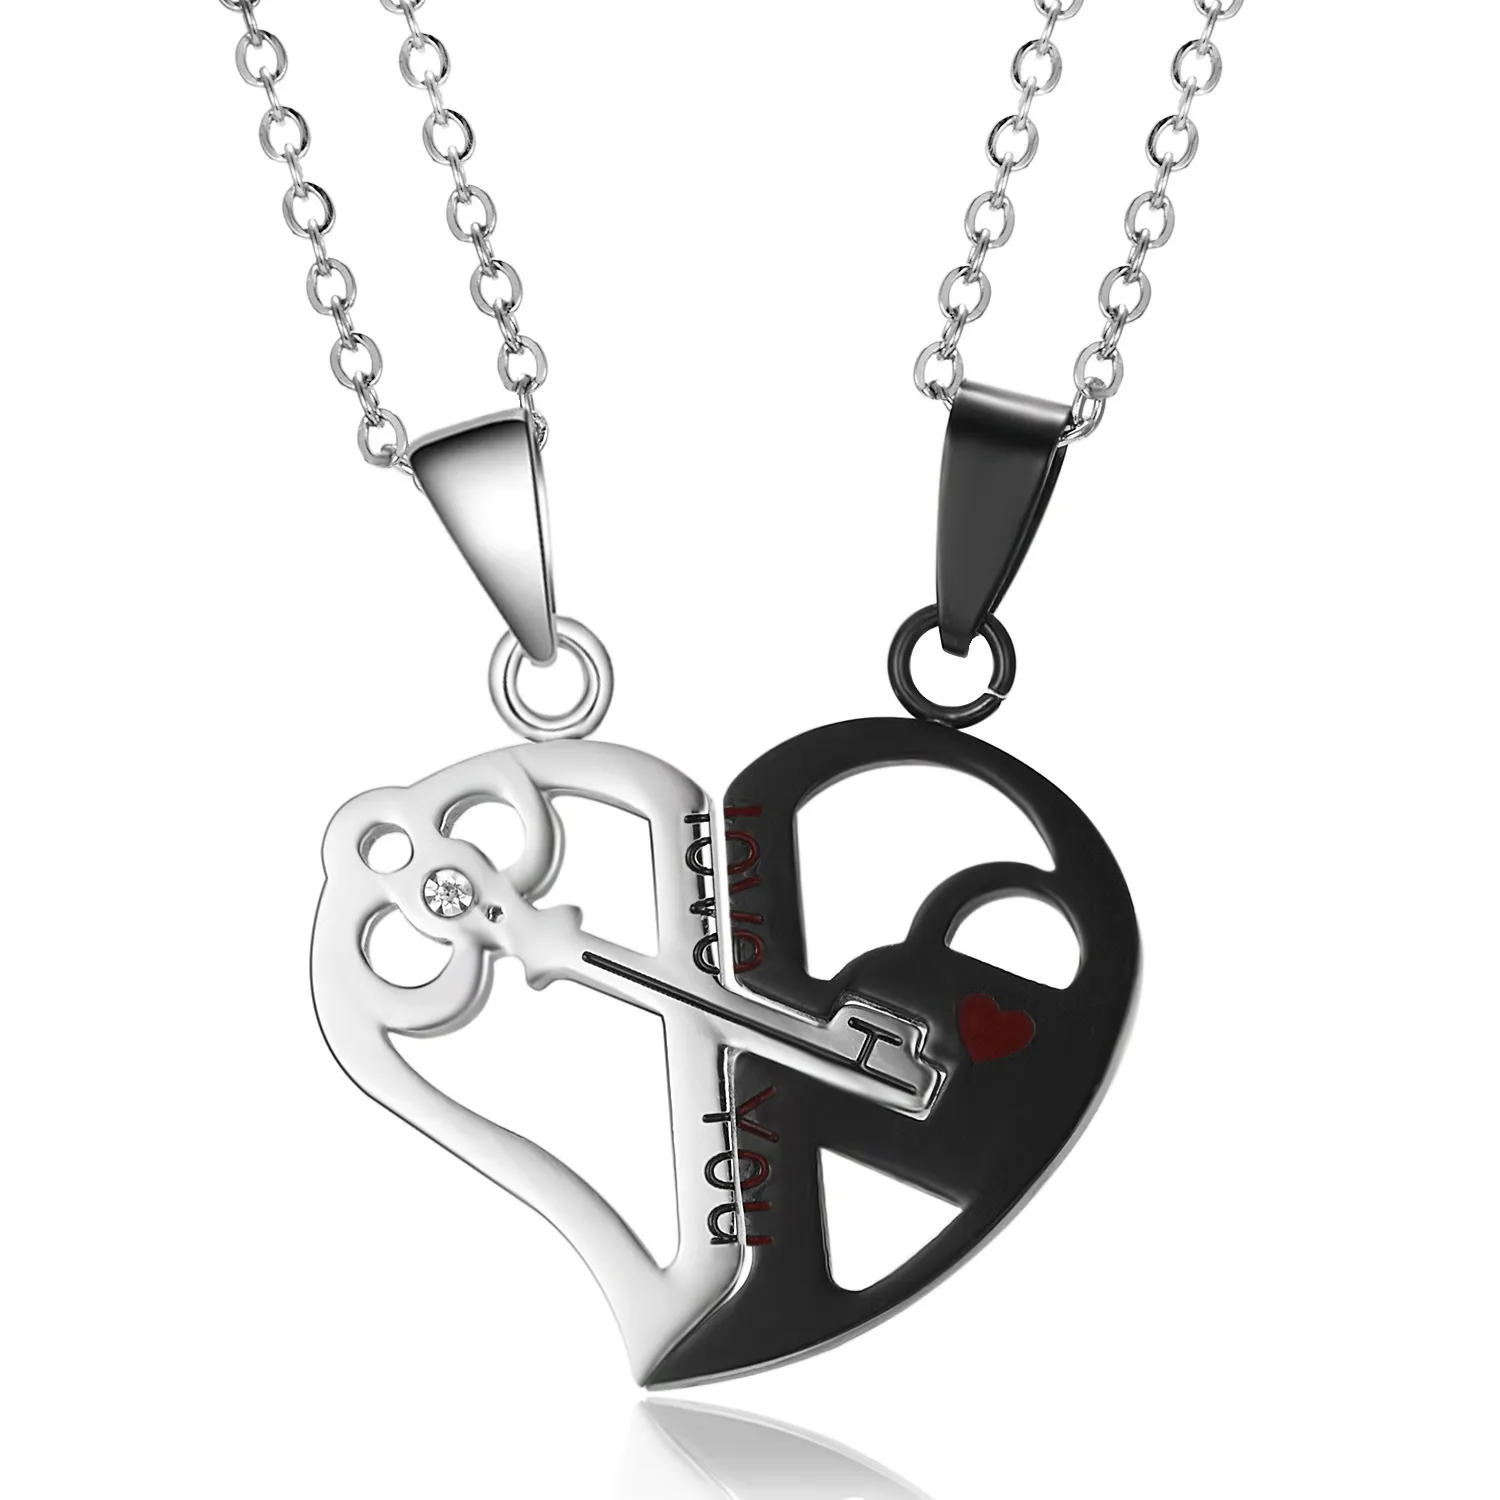 Lovers Couple Necklace Stainless Steel Heart Lock Key Pendant Valentine's  Gift | eBay